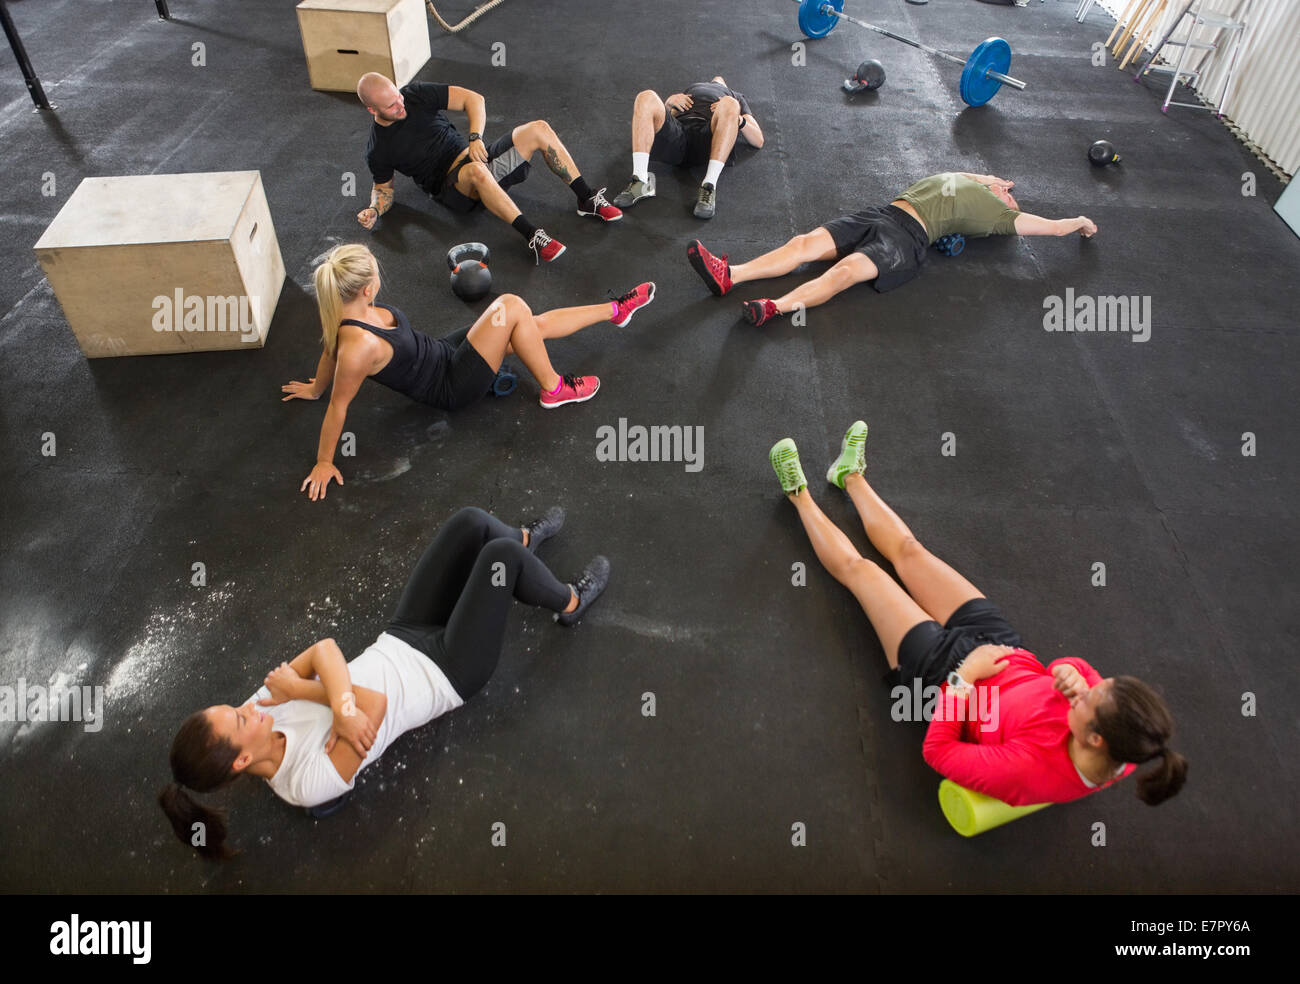 People Stretching in Cross Training Box Stock Photo